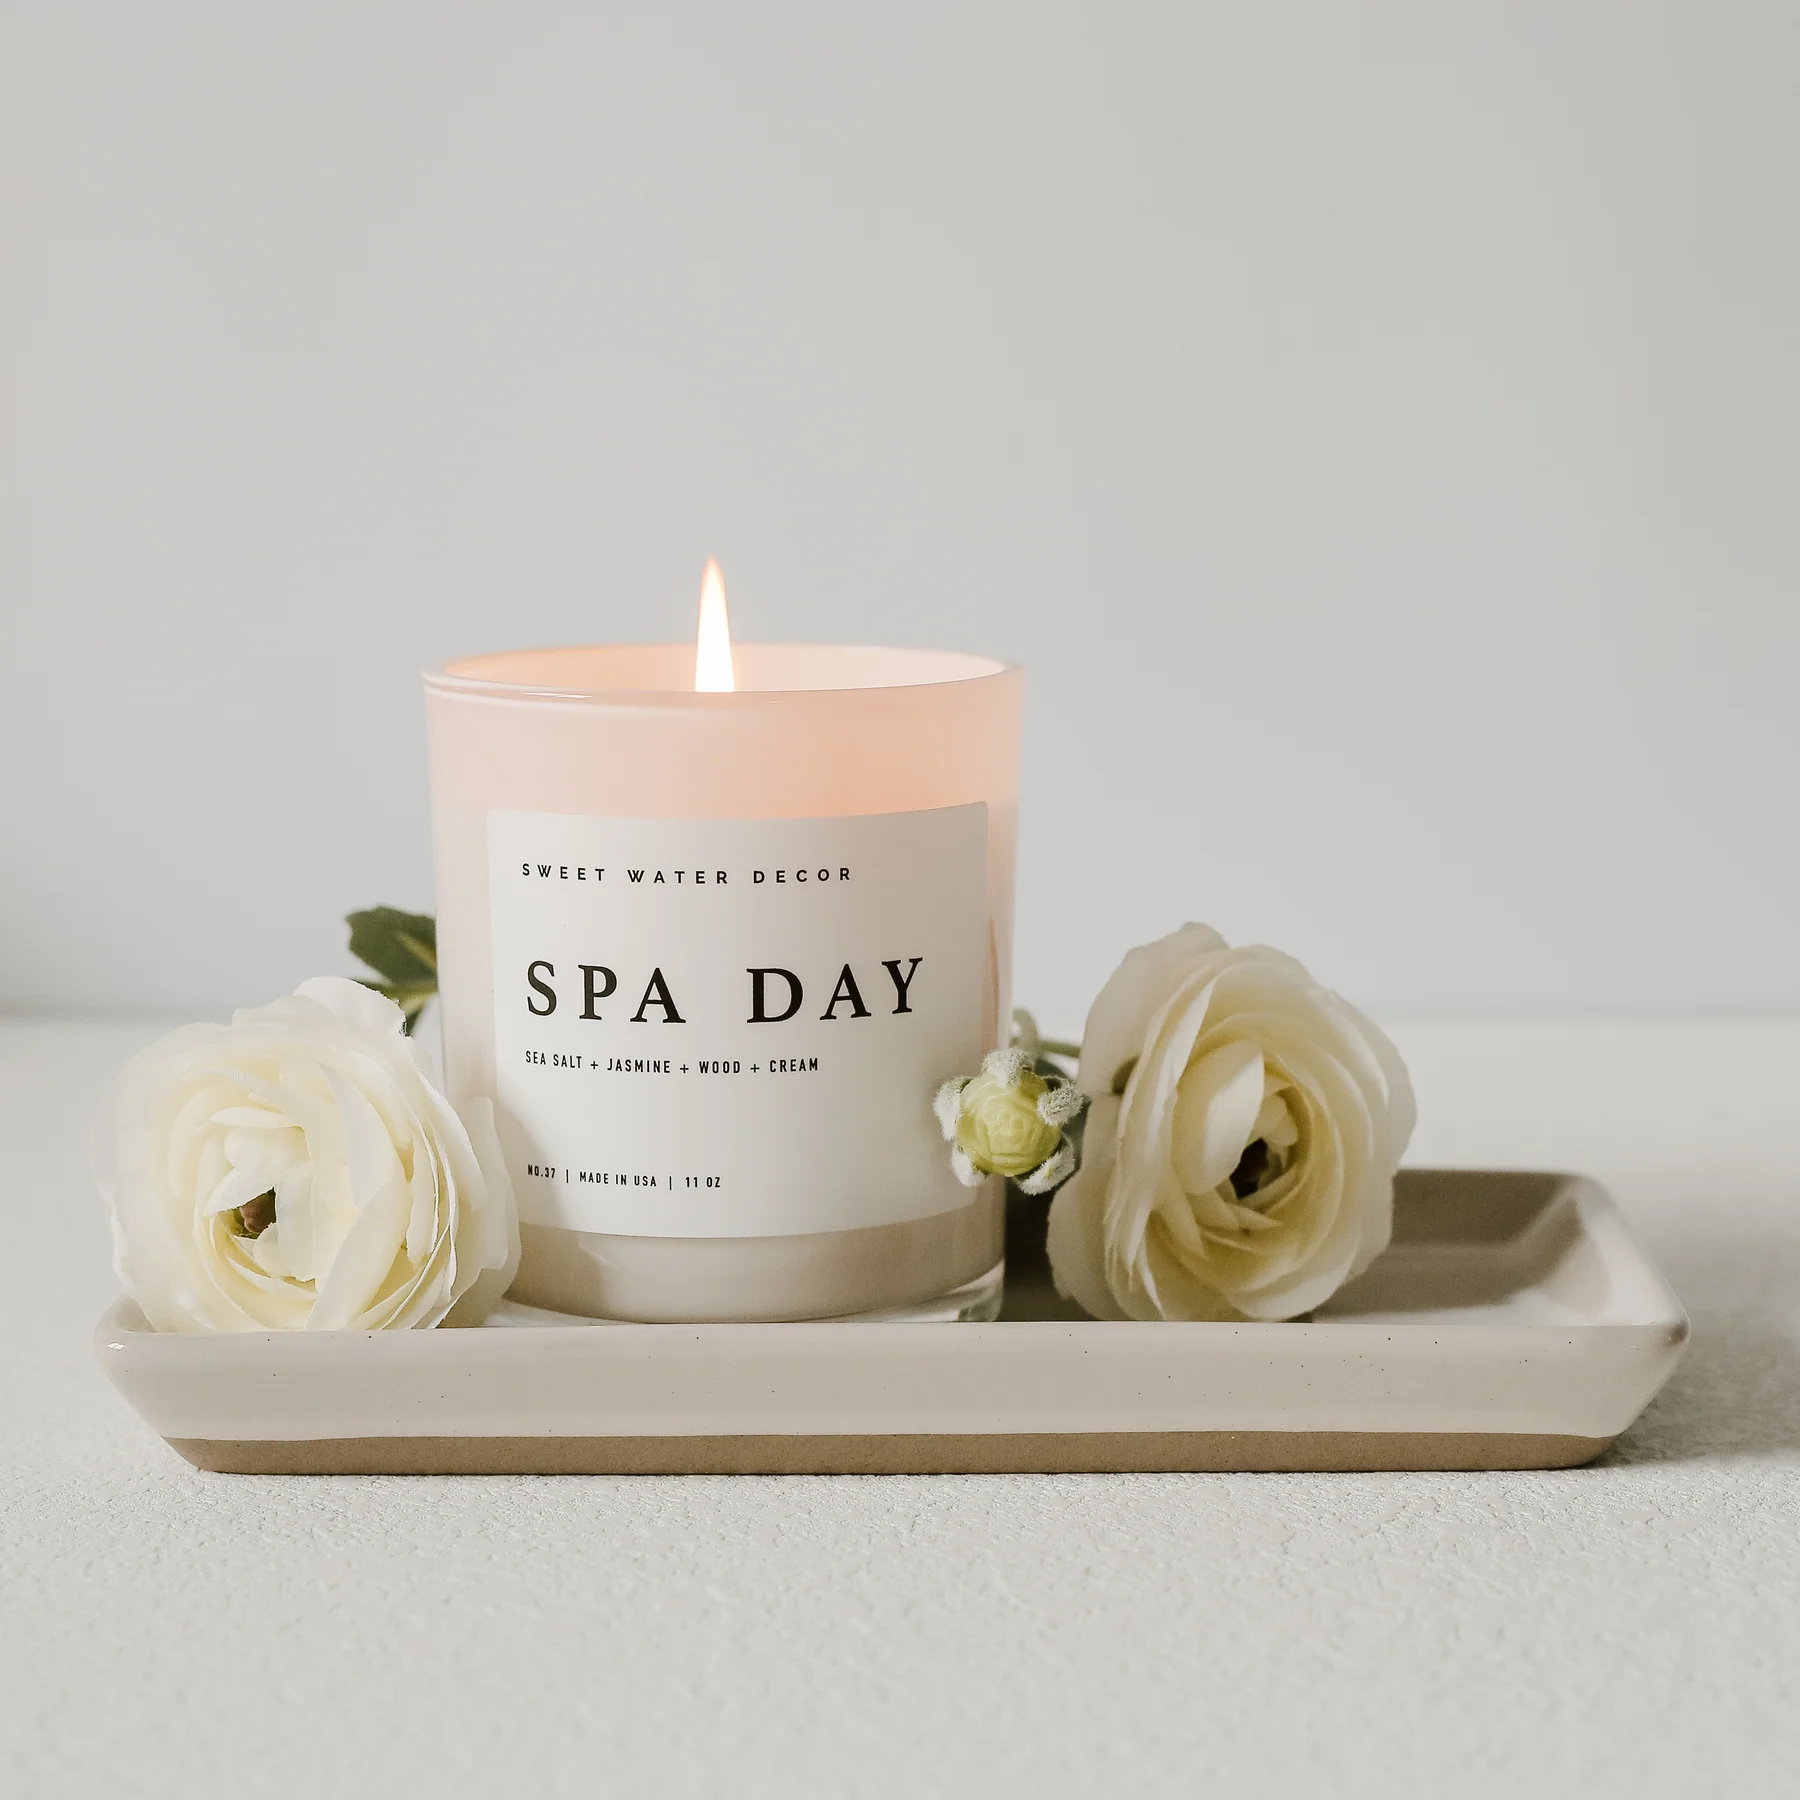 SPA DAY by SWEET WATER DECOR